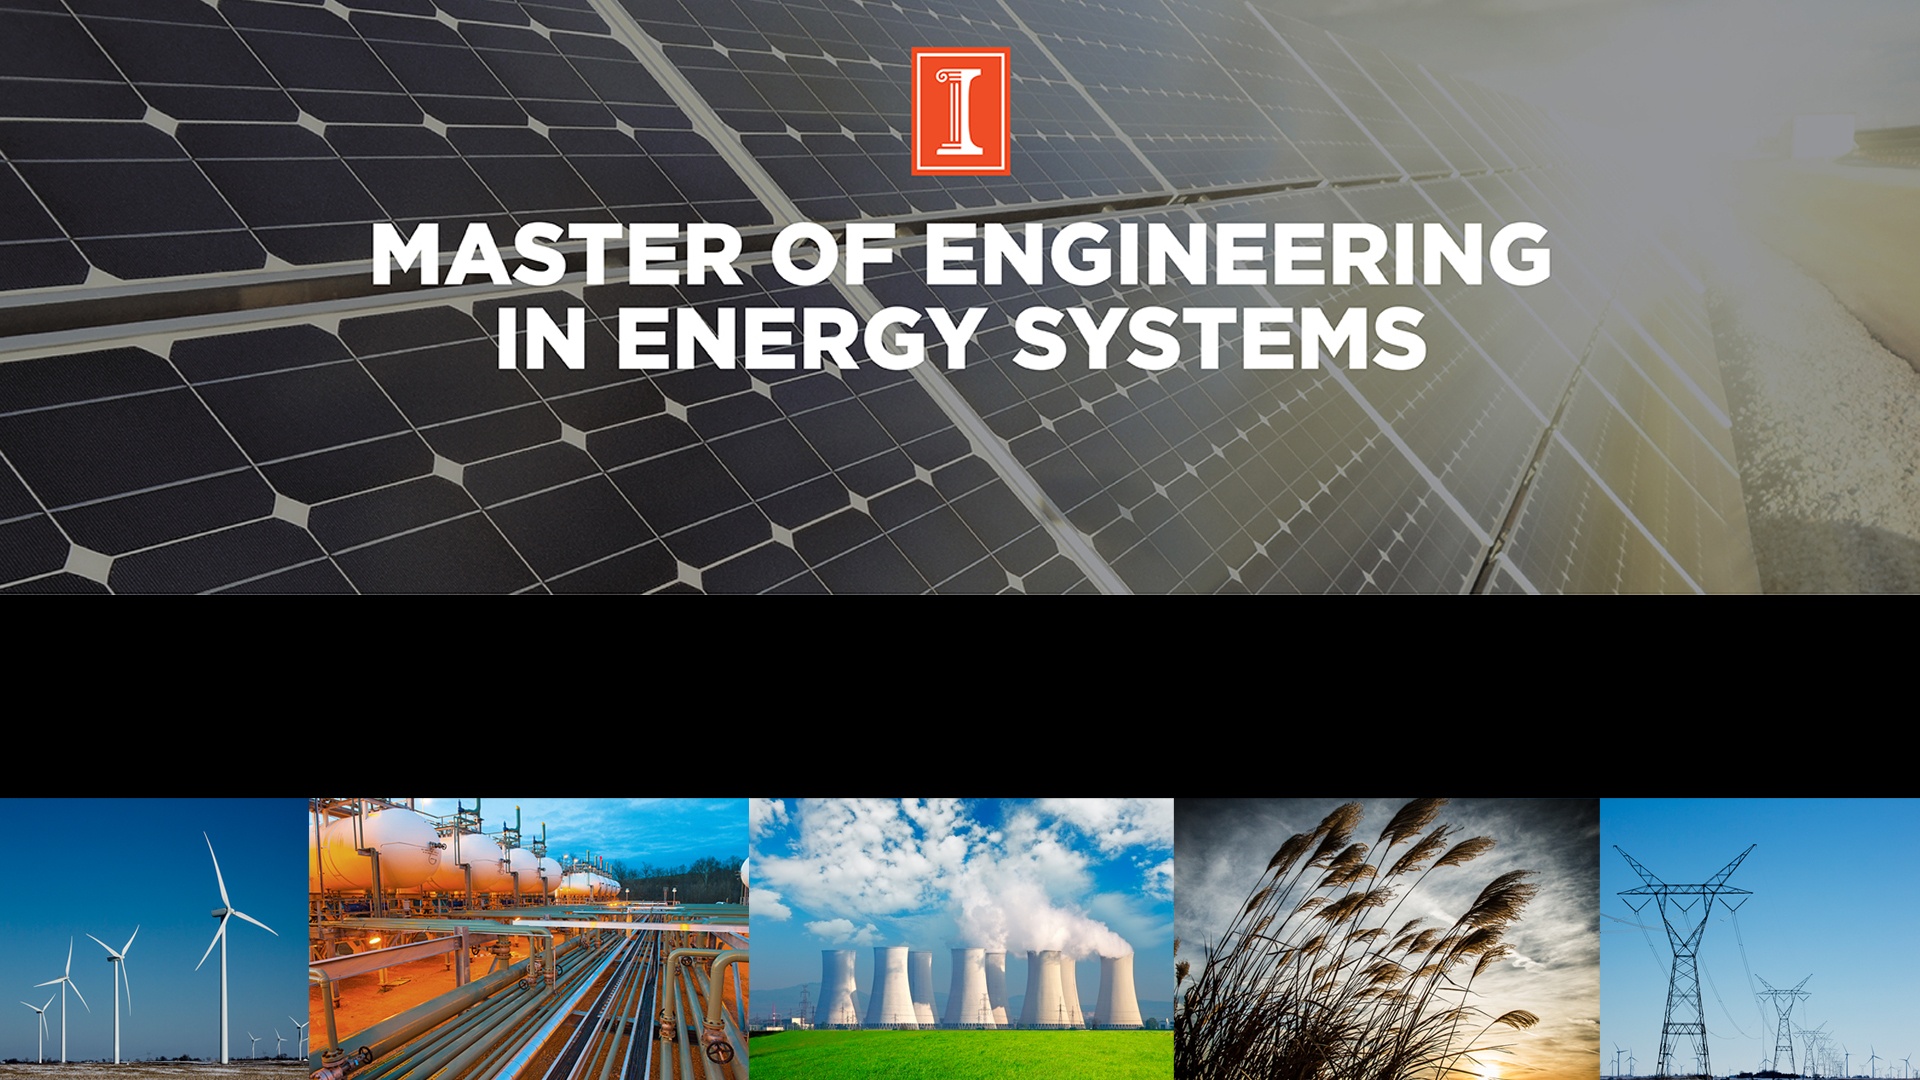 Energy Systems offers 5-year degree program to earn combined bachelor's and master's of engineering